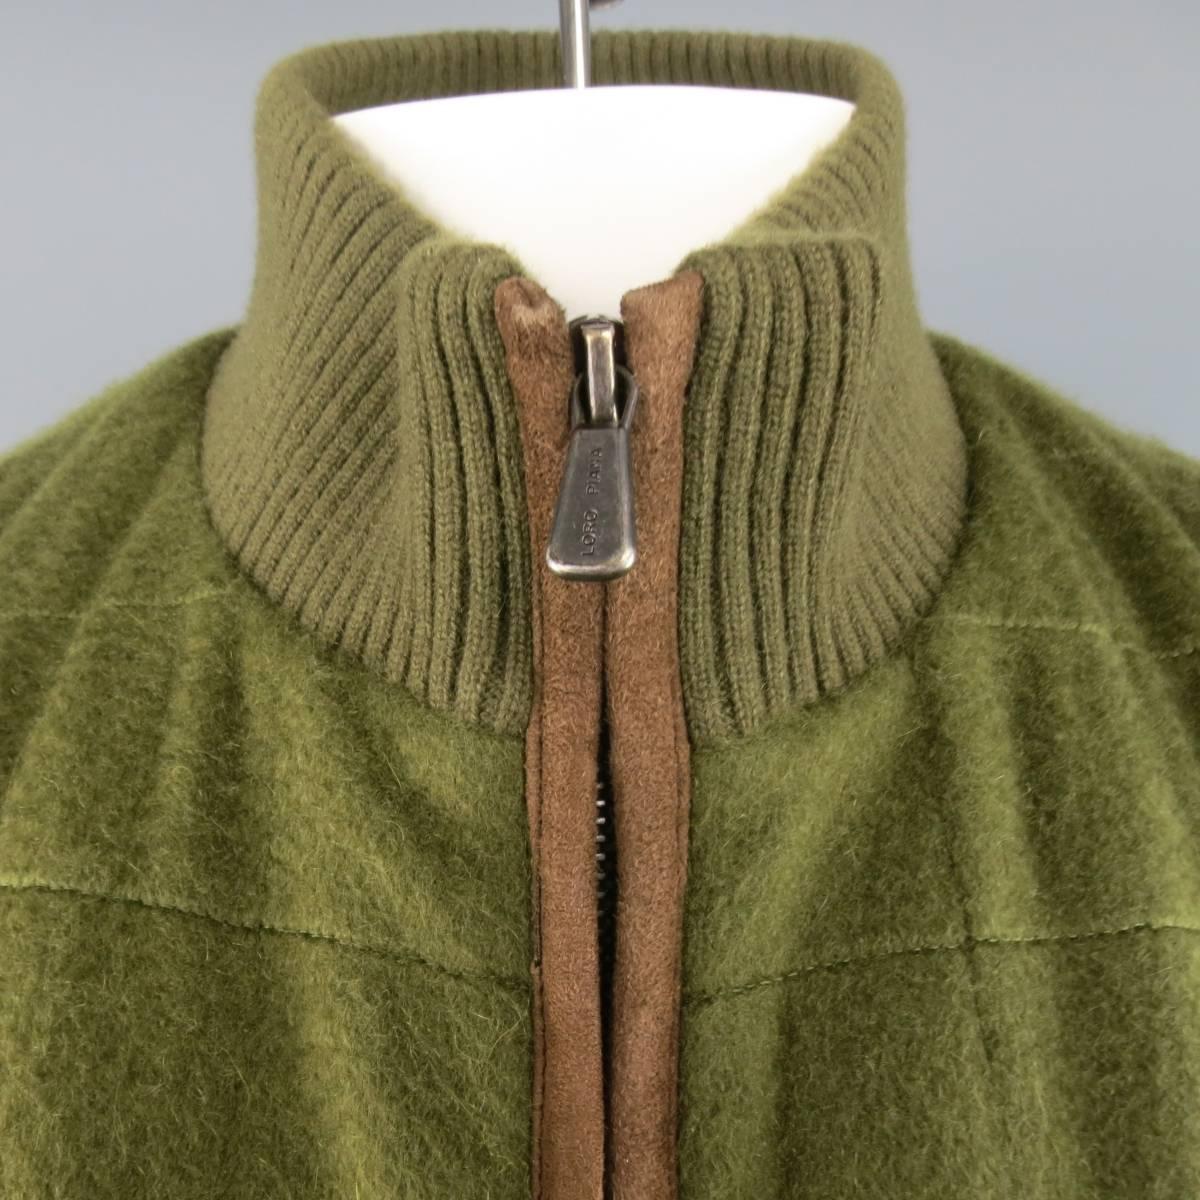 LORO PIANA fall/winter vest comes in an olive green quilted cashmere and features a high ribbed collar, double zip closure, slit pockets, and tan suede piping. Wear throughout. Made in Italy.
 
Good Pre-Owned Condition.
Marked: XL
 
Measurements:
